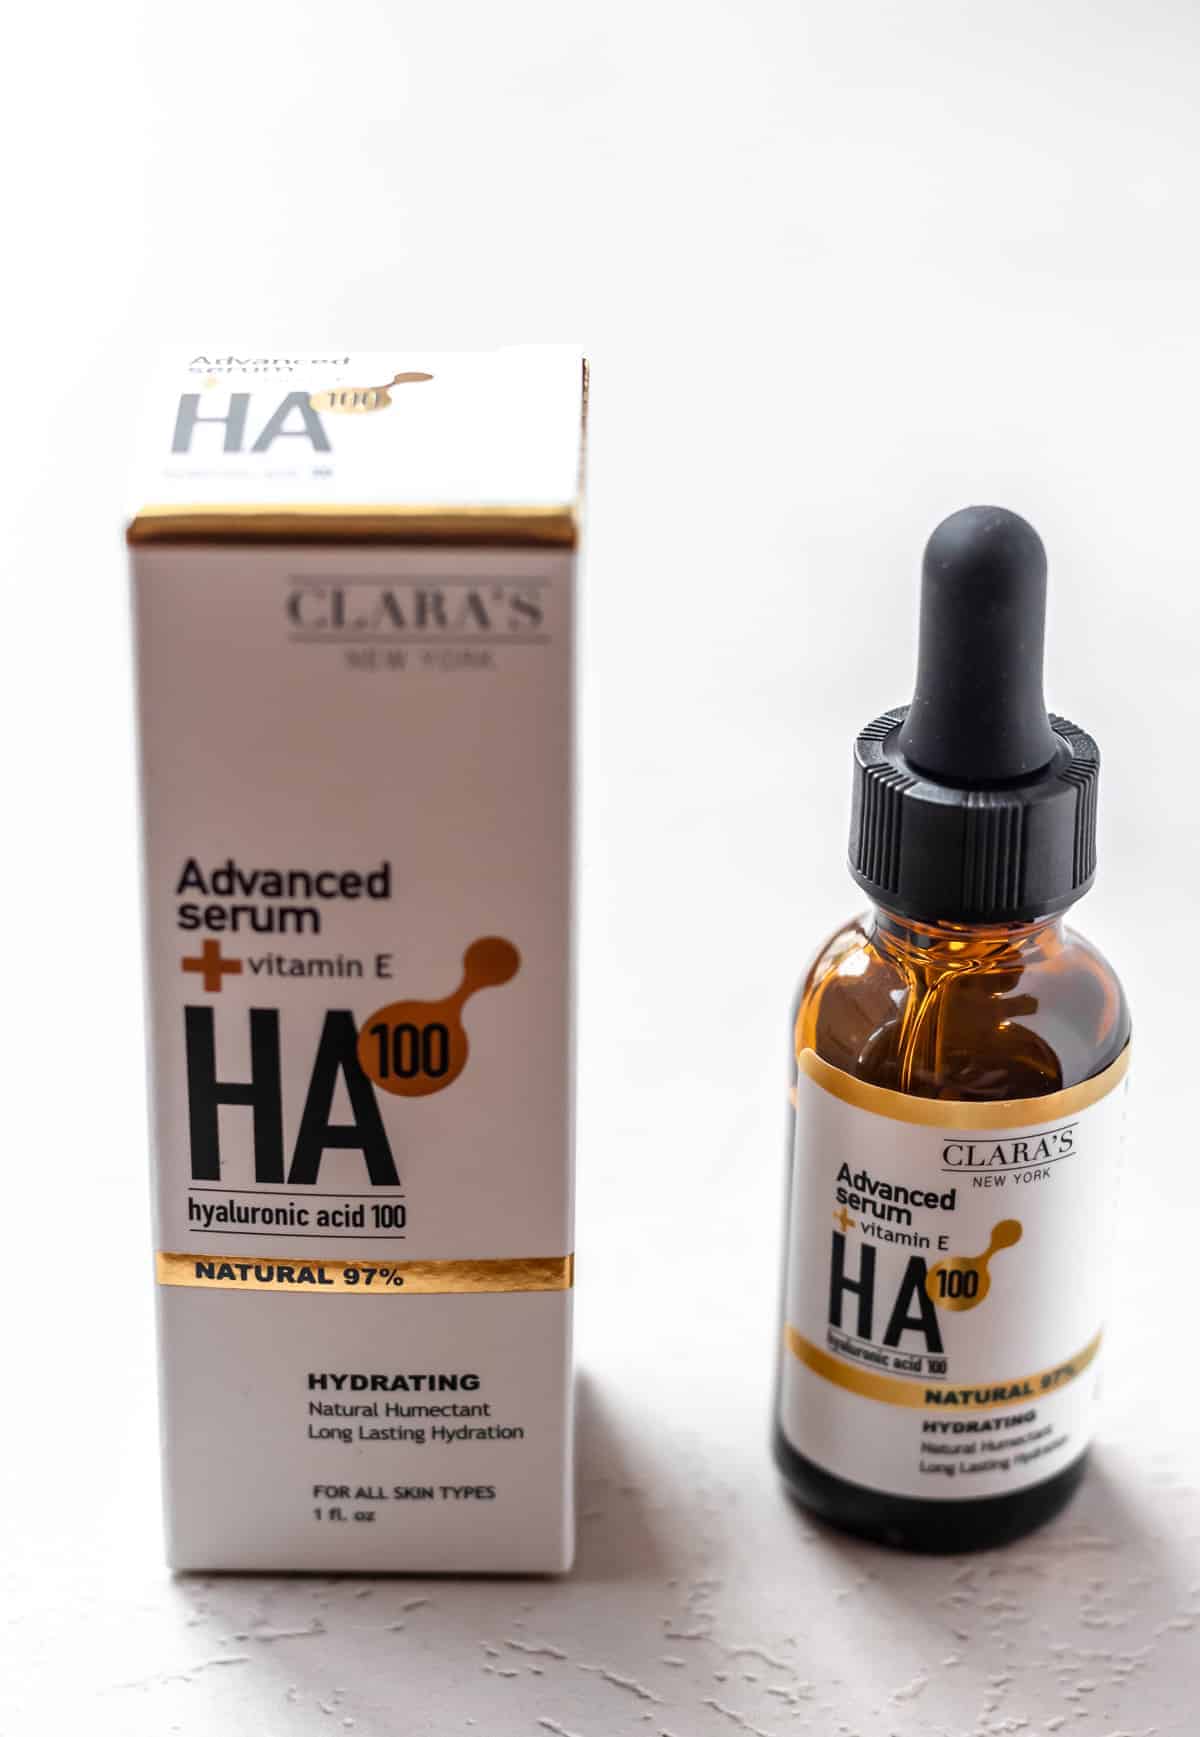 Clara's New York Hydrating Hyaluronic Acid 100 Facial Serum box and bottle on a light background